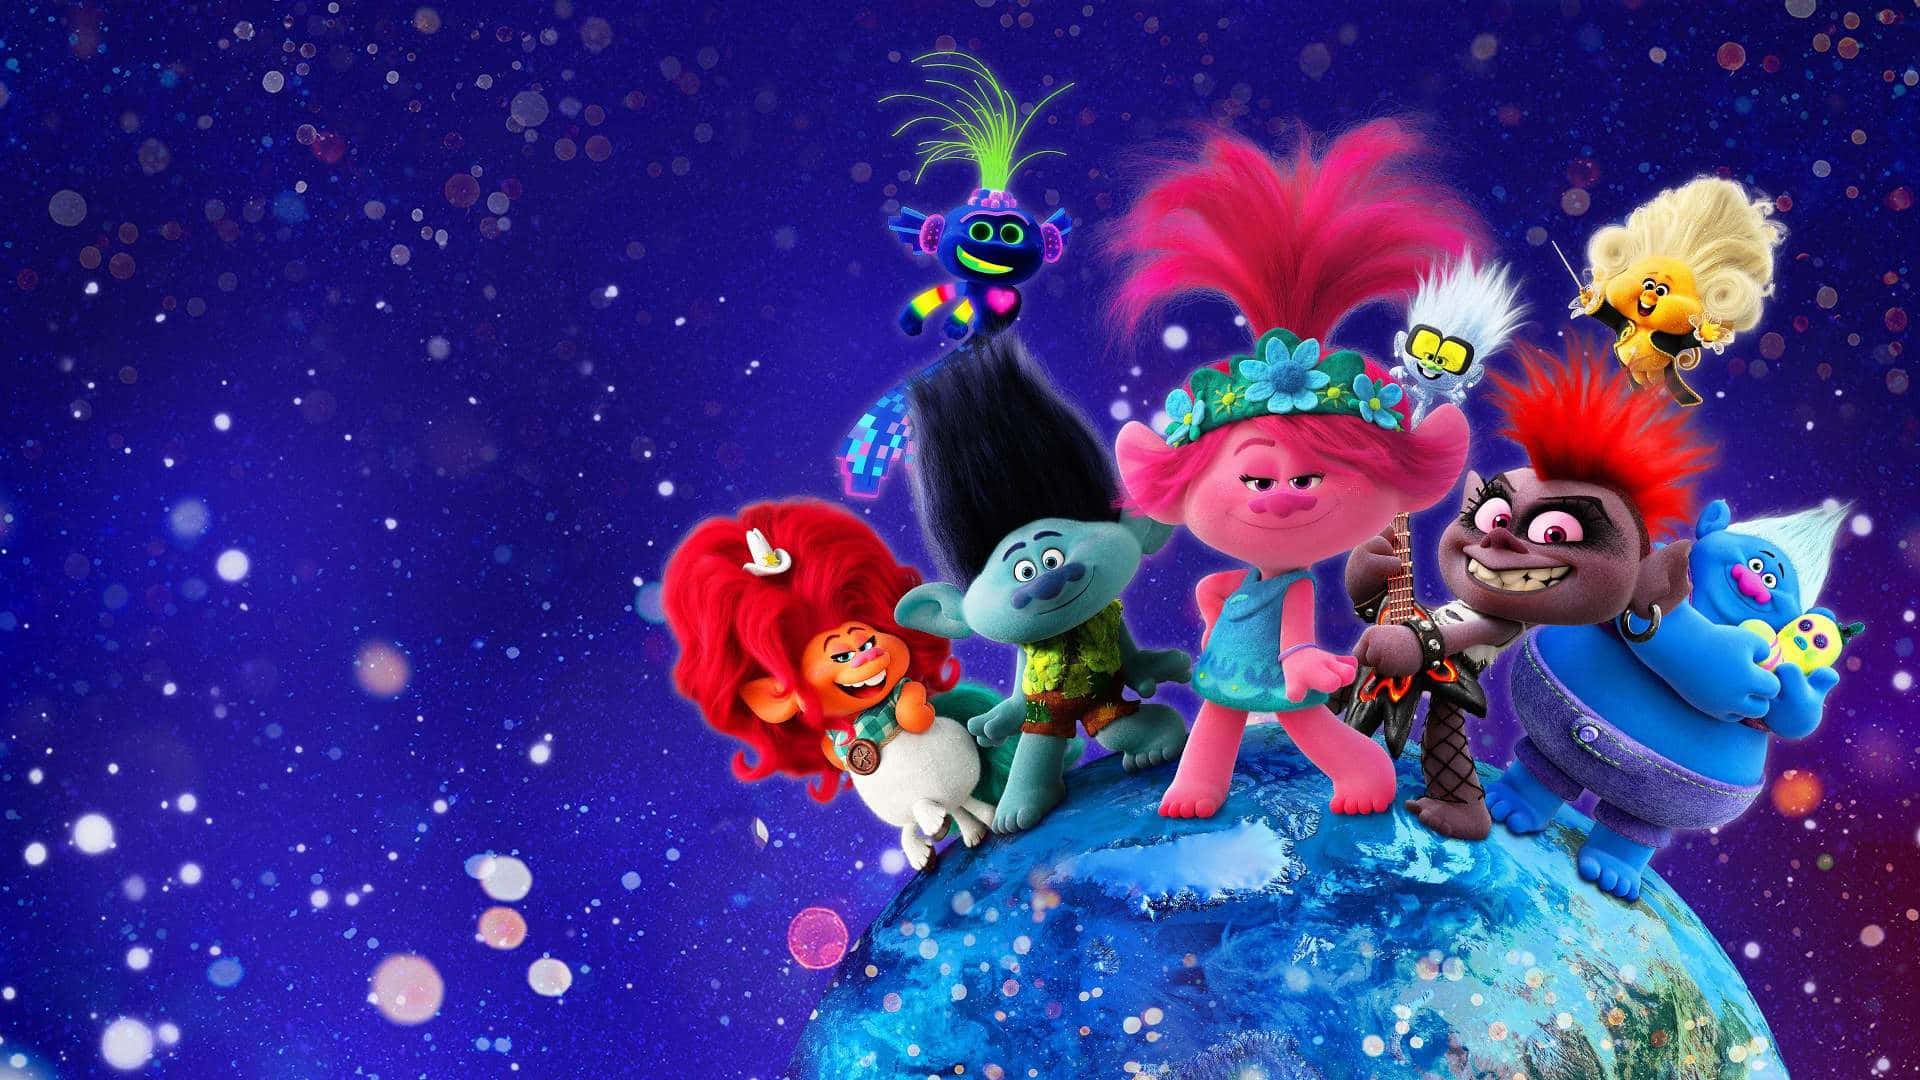 Download Trolls - Here to Brighten Up Your Day!